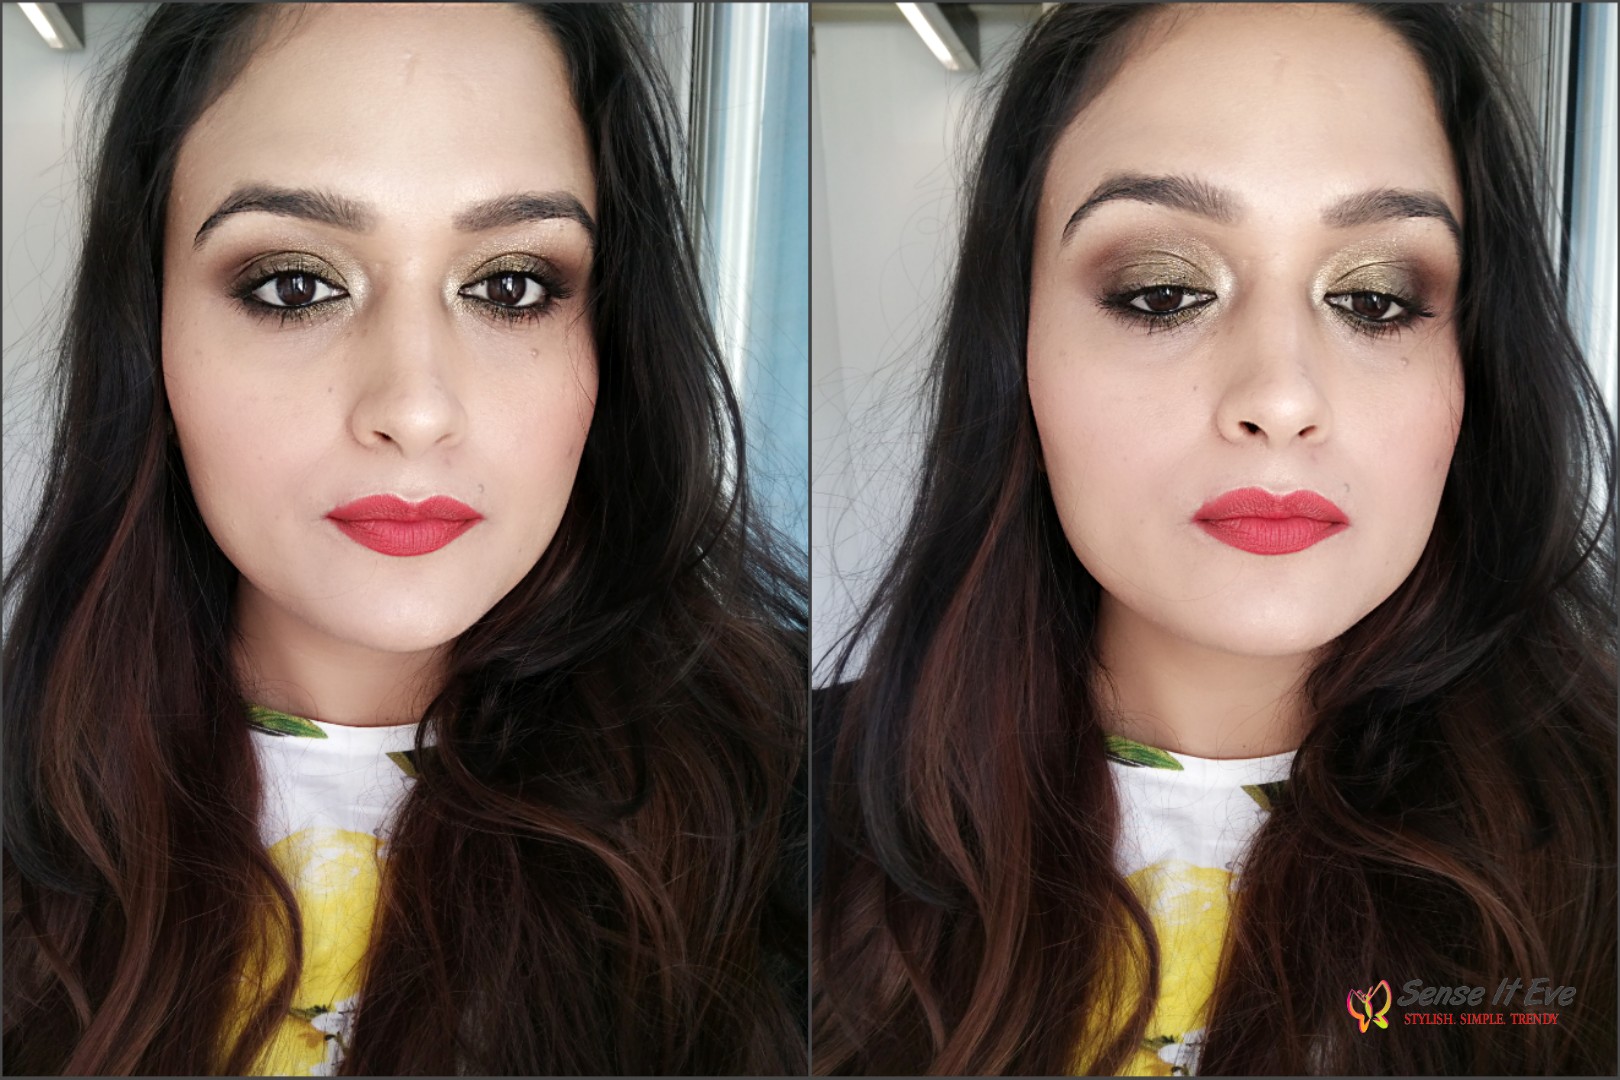 Lakme 9 to 5 Eyeshadow Quartet Tanjore Rush Makeup look 2 Sense It Eve Lakme 9 to 5 Eyeshadow Quartet Tanjore Rush : Review & Swatches